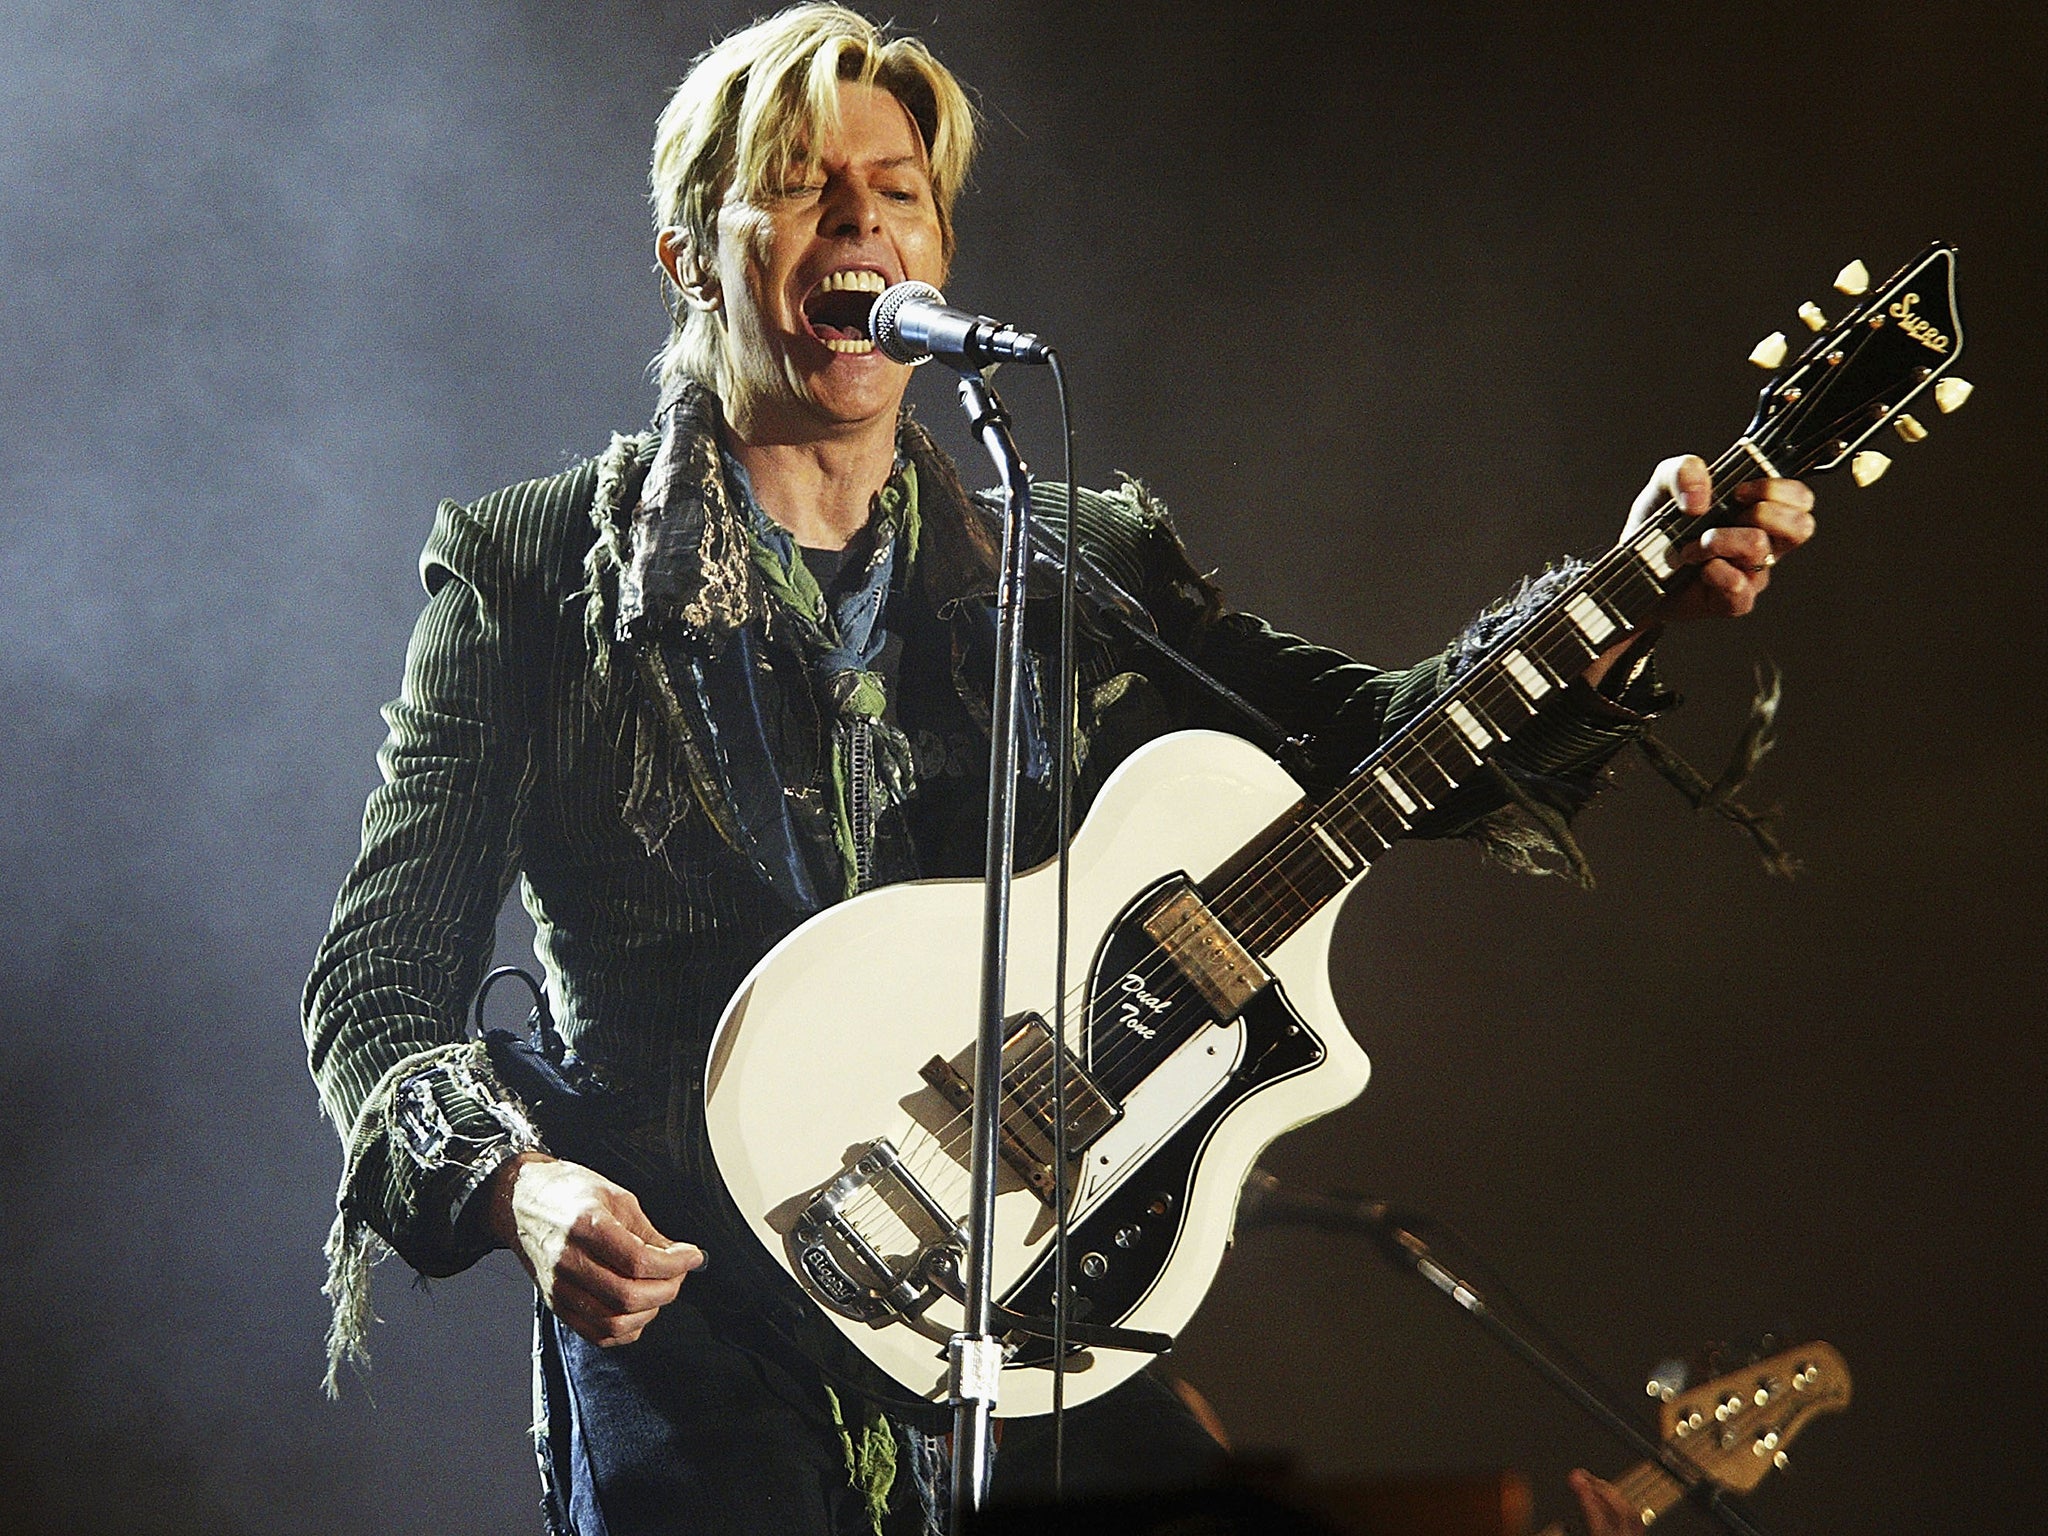 The essence of Bowie, and why we all love him so much, remains as alight as ever